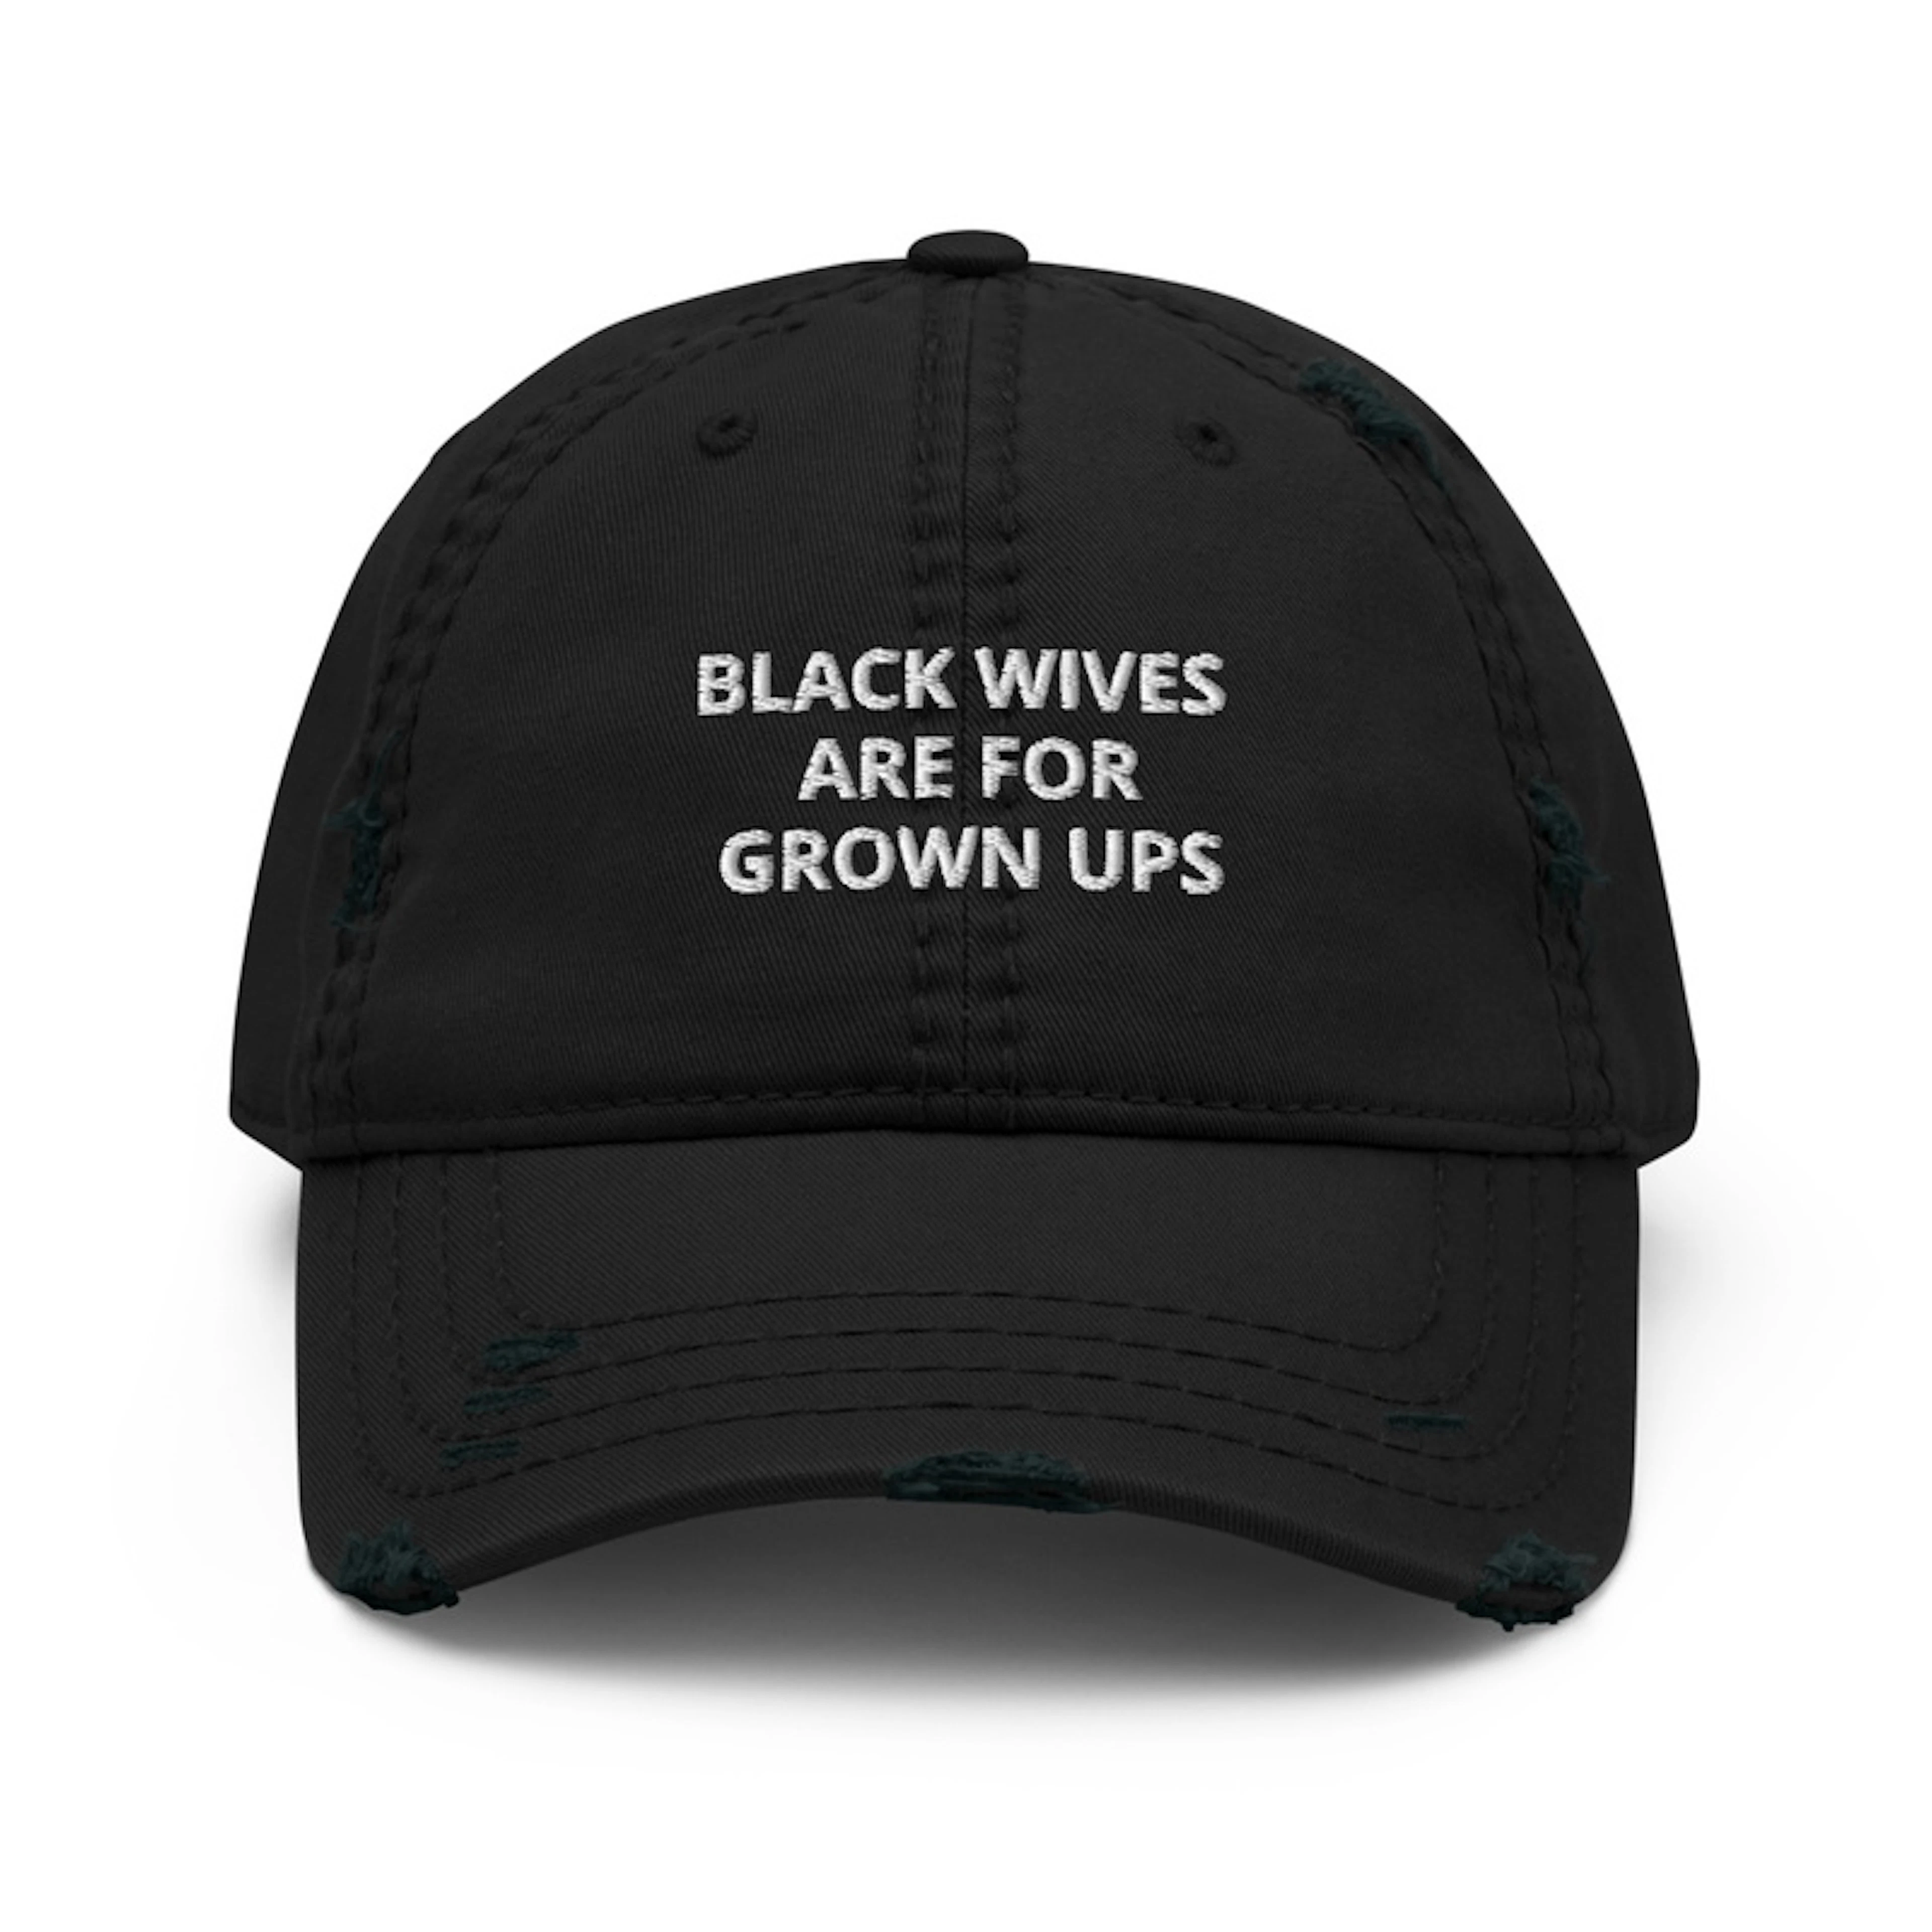 BLACK WIVES ARE FOR GROWN UPS